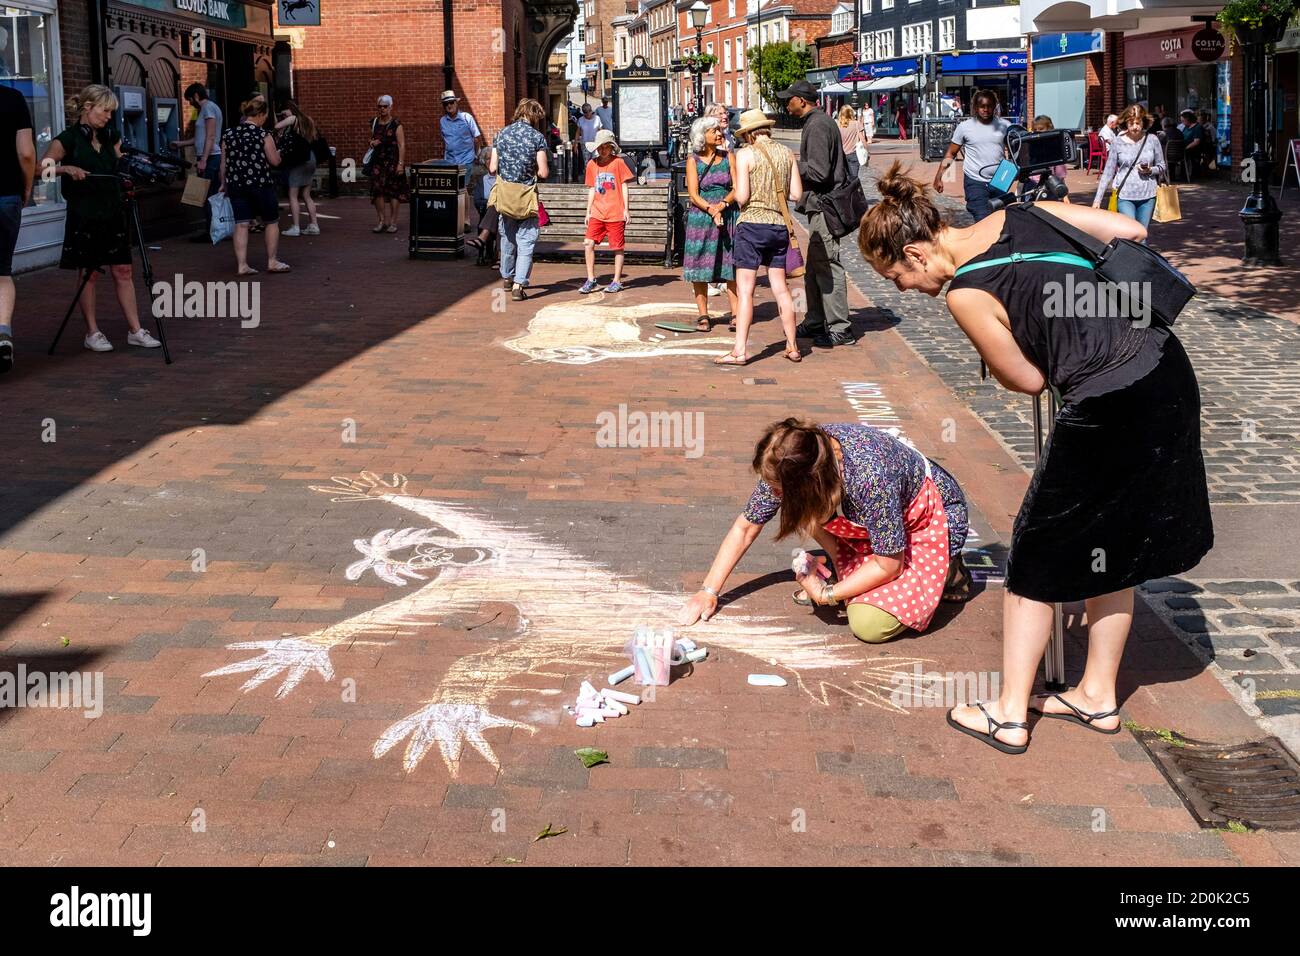 Climate Change Activists Drawing Pictures On The Pavement (Sidewalk), Lewes, East Sussex, UK. Stock Photo